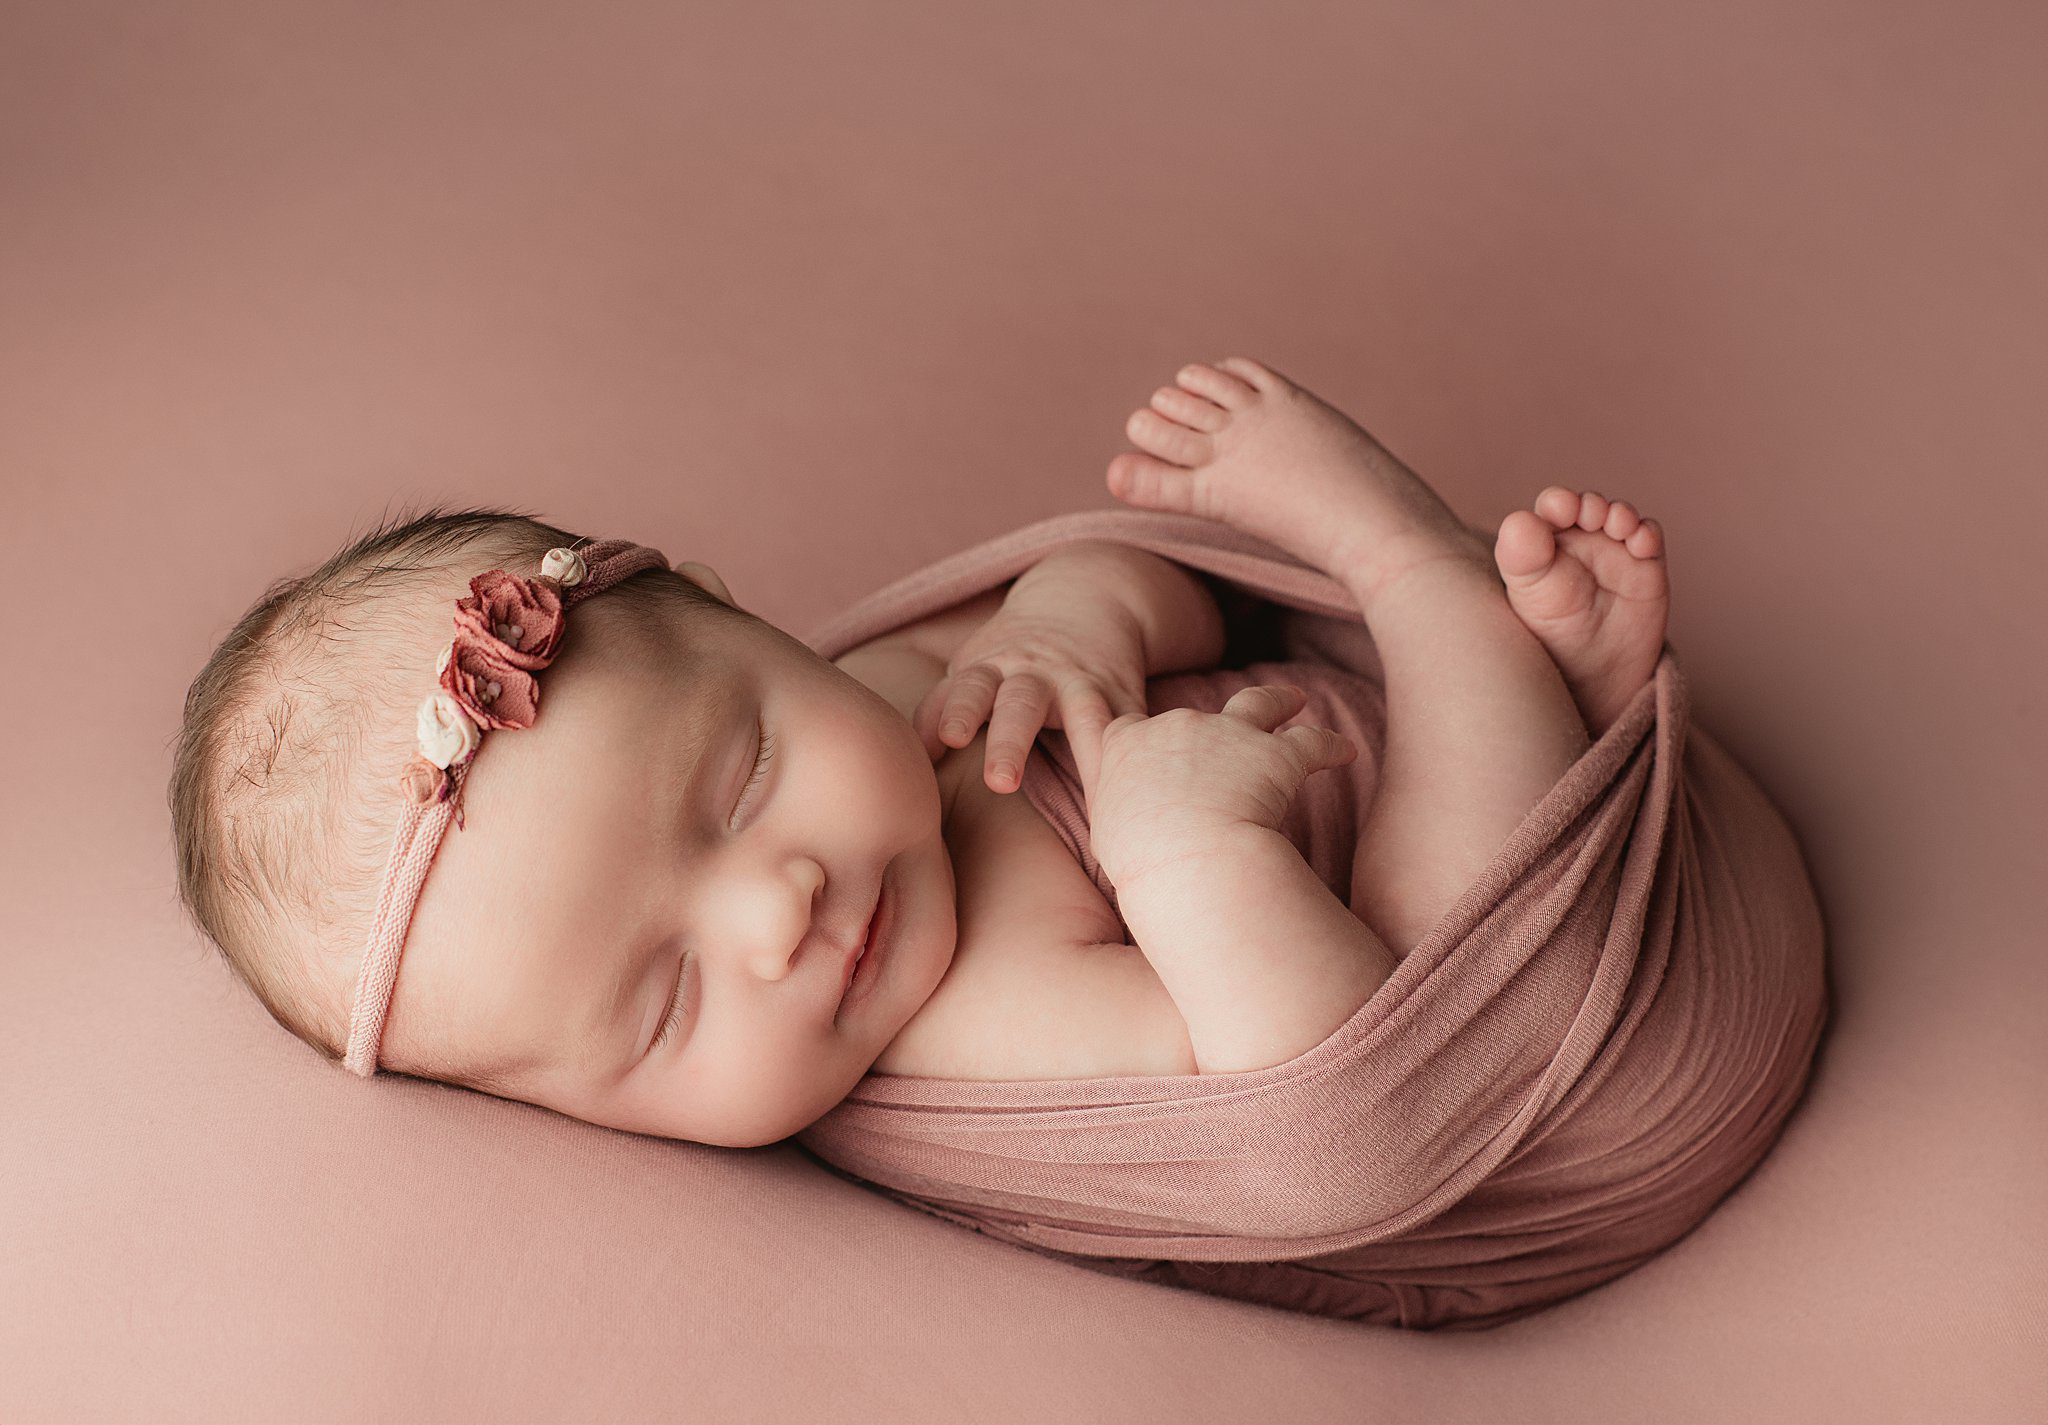 A newborn baby sleeps in a pink swaddle with legs and arms out